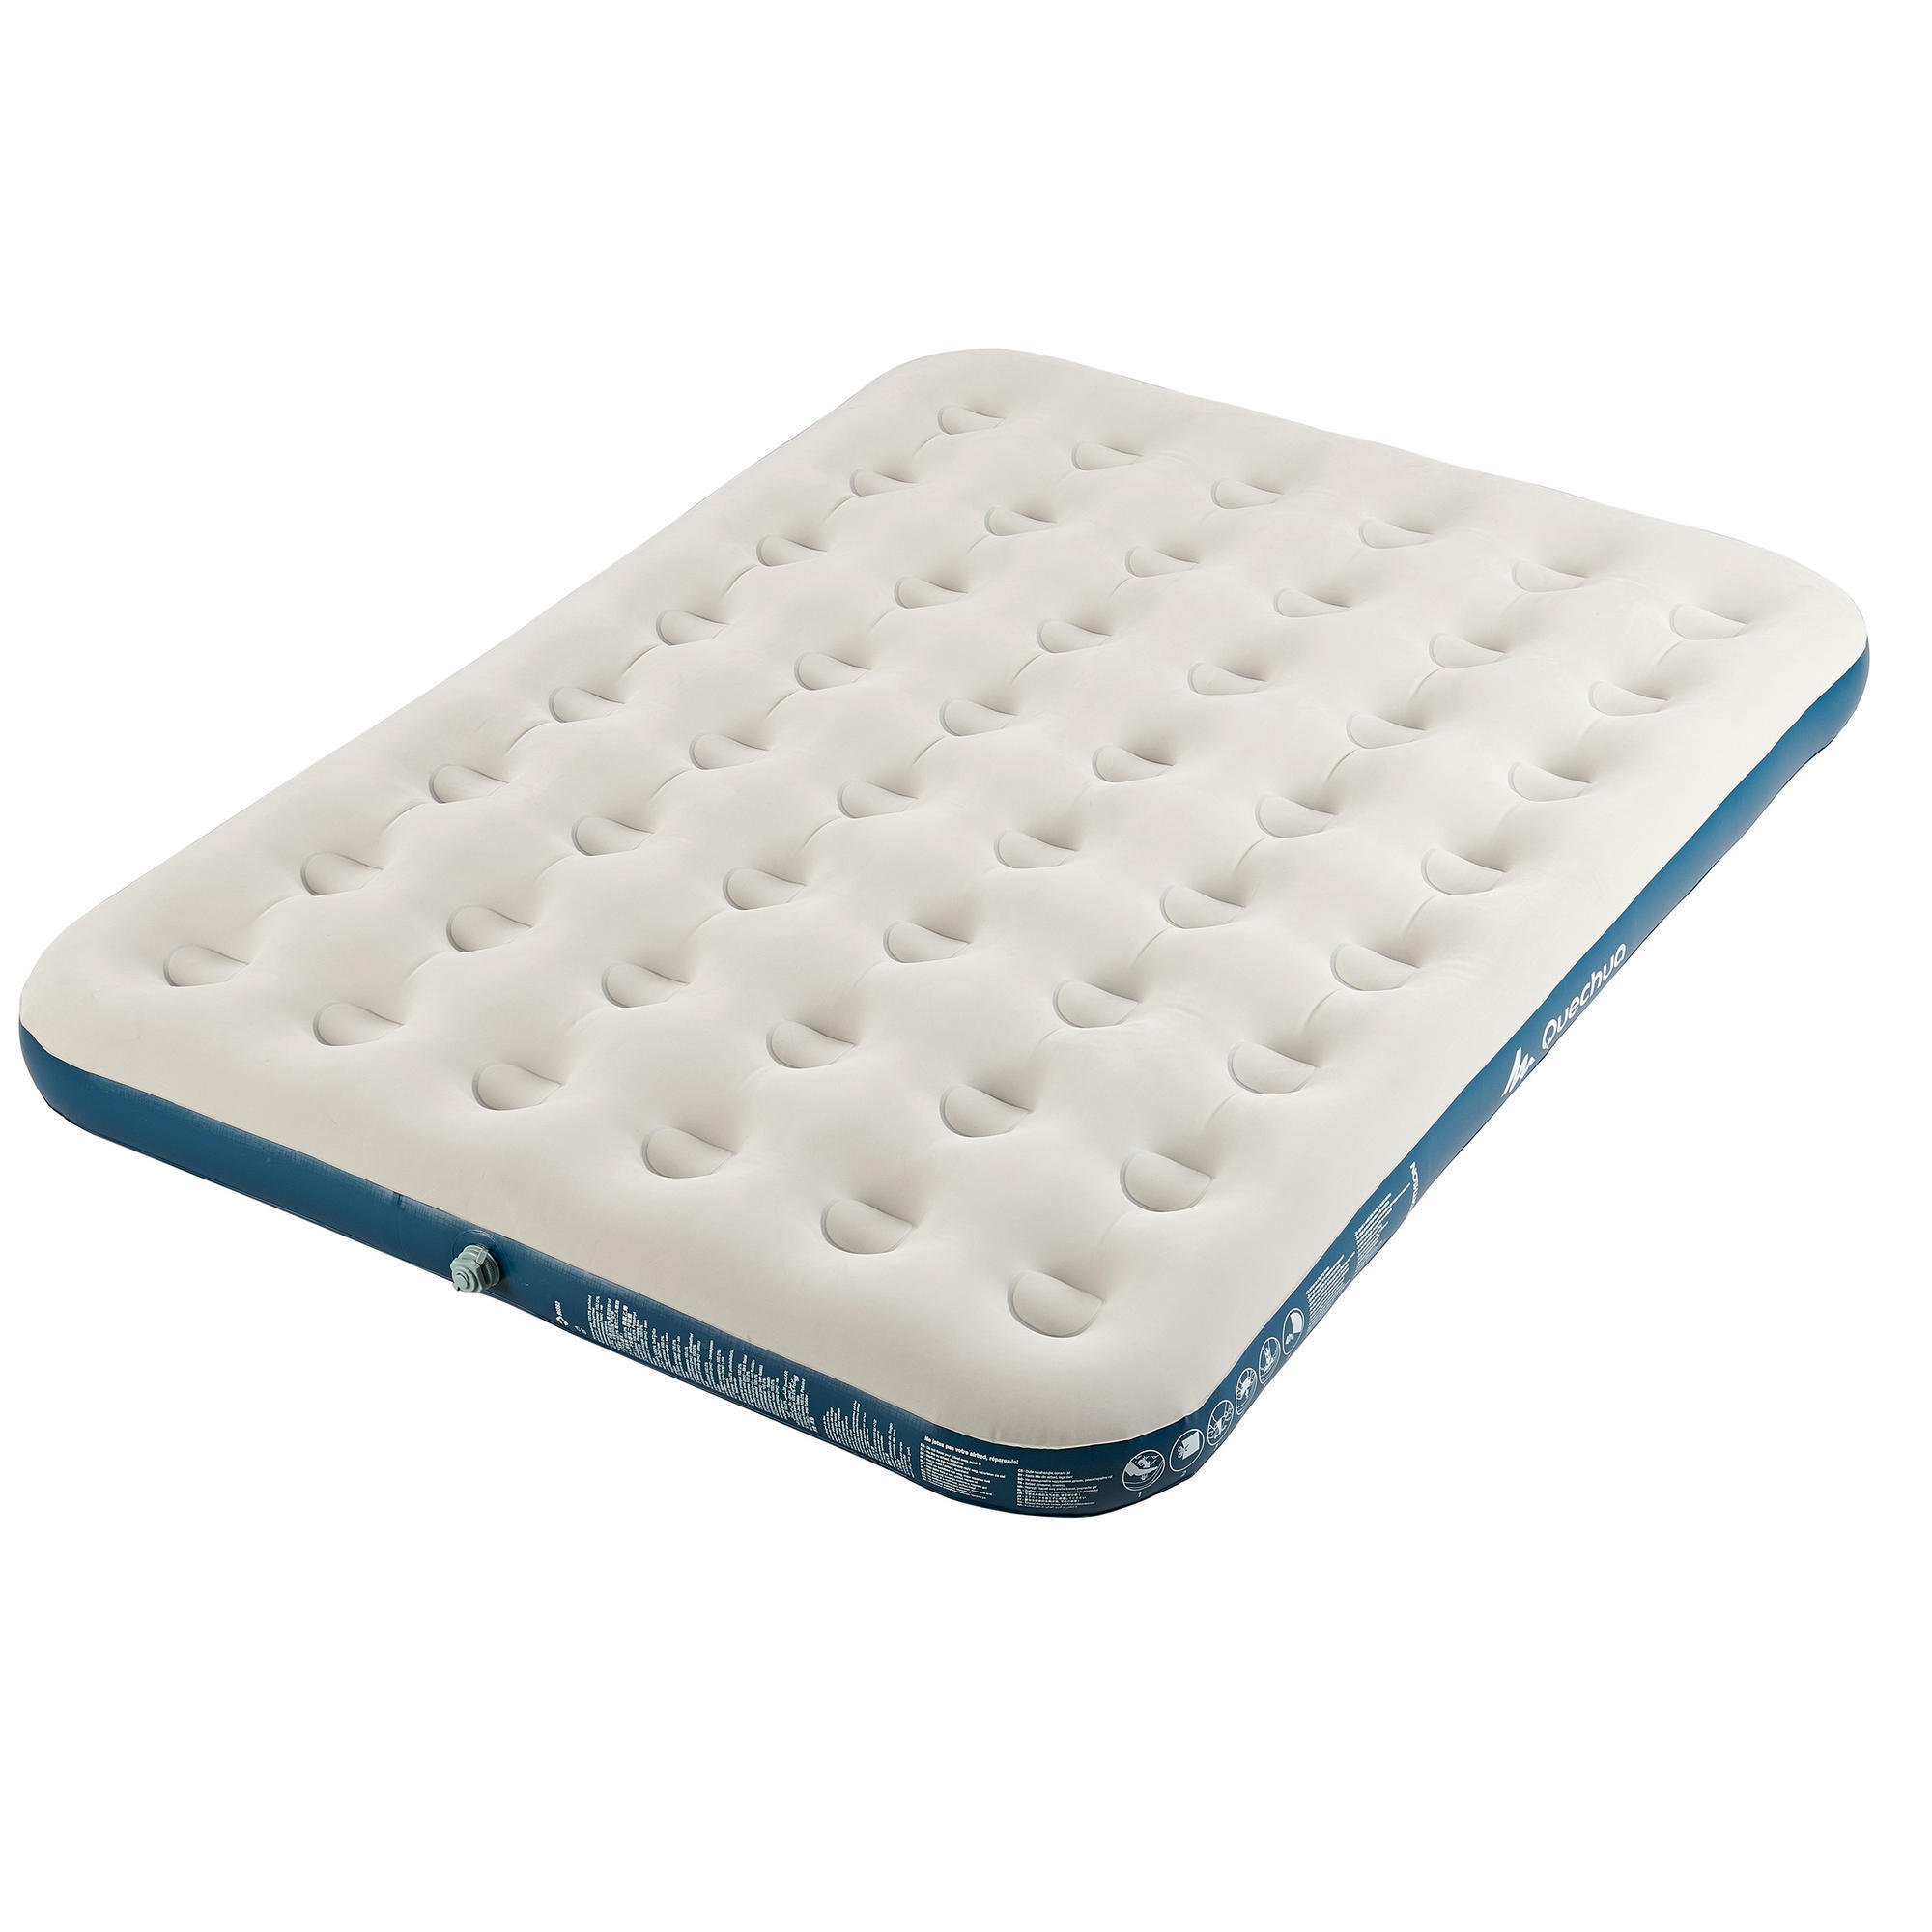 decathlon inflatable bed